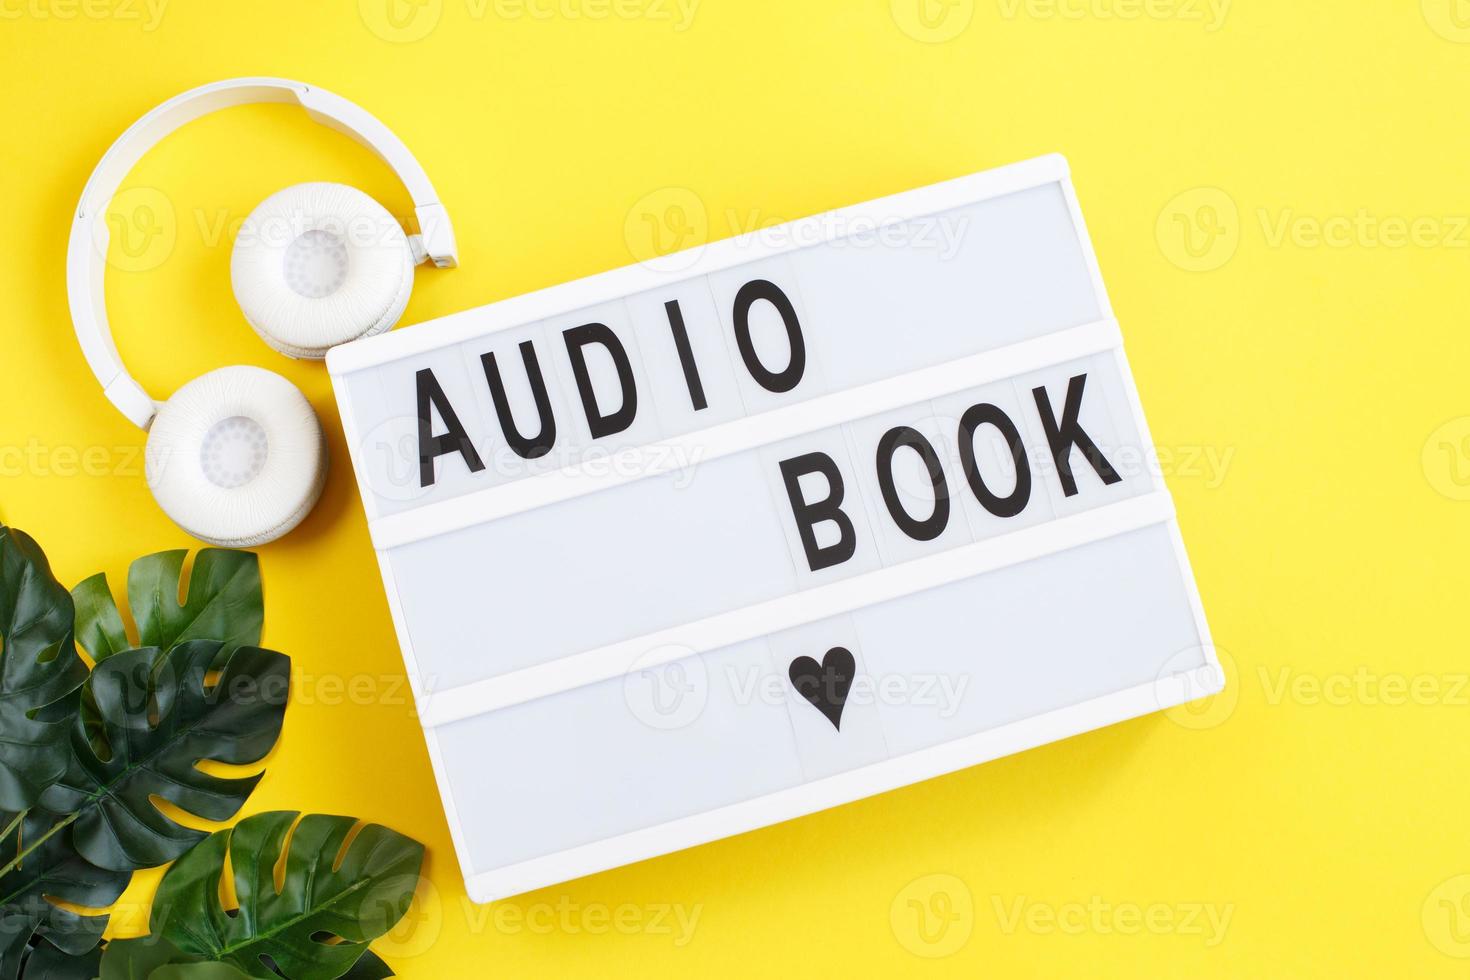 inscription audiobook on a light box with modern white headphones on a yellow background photo